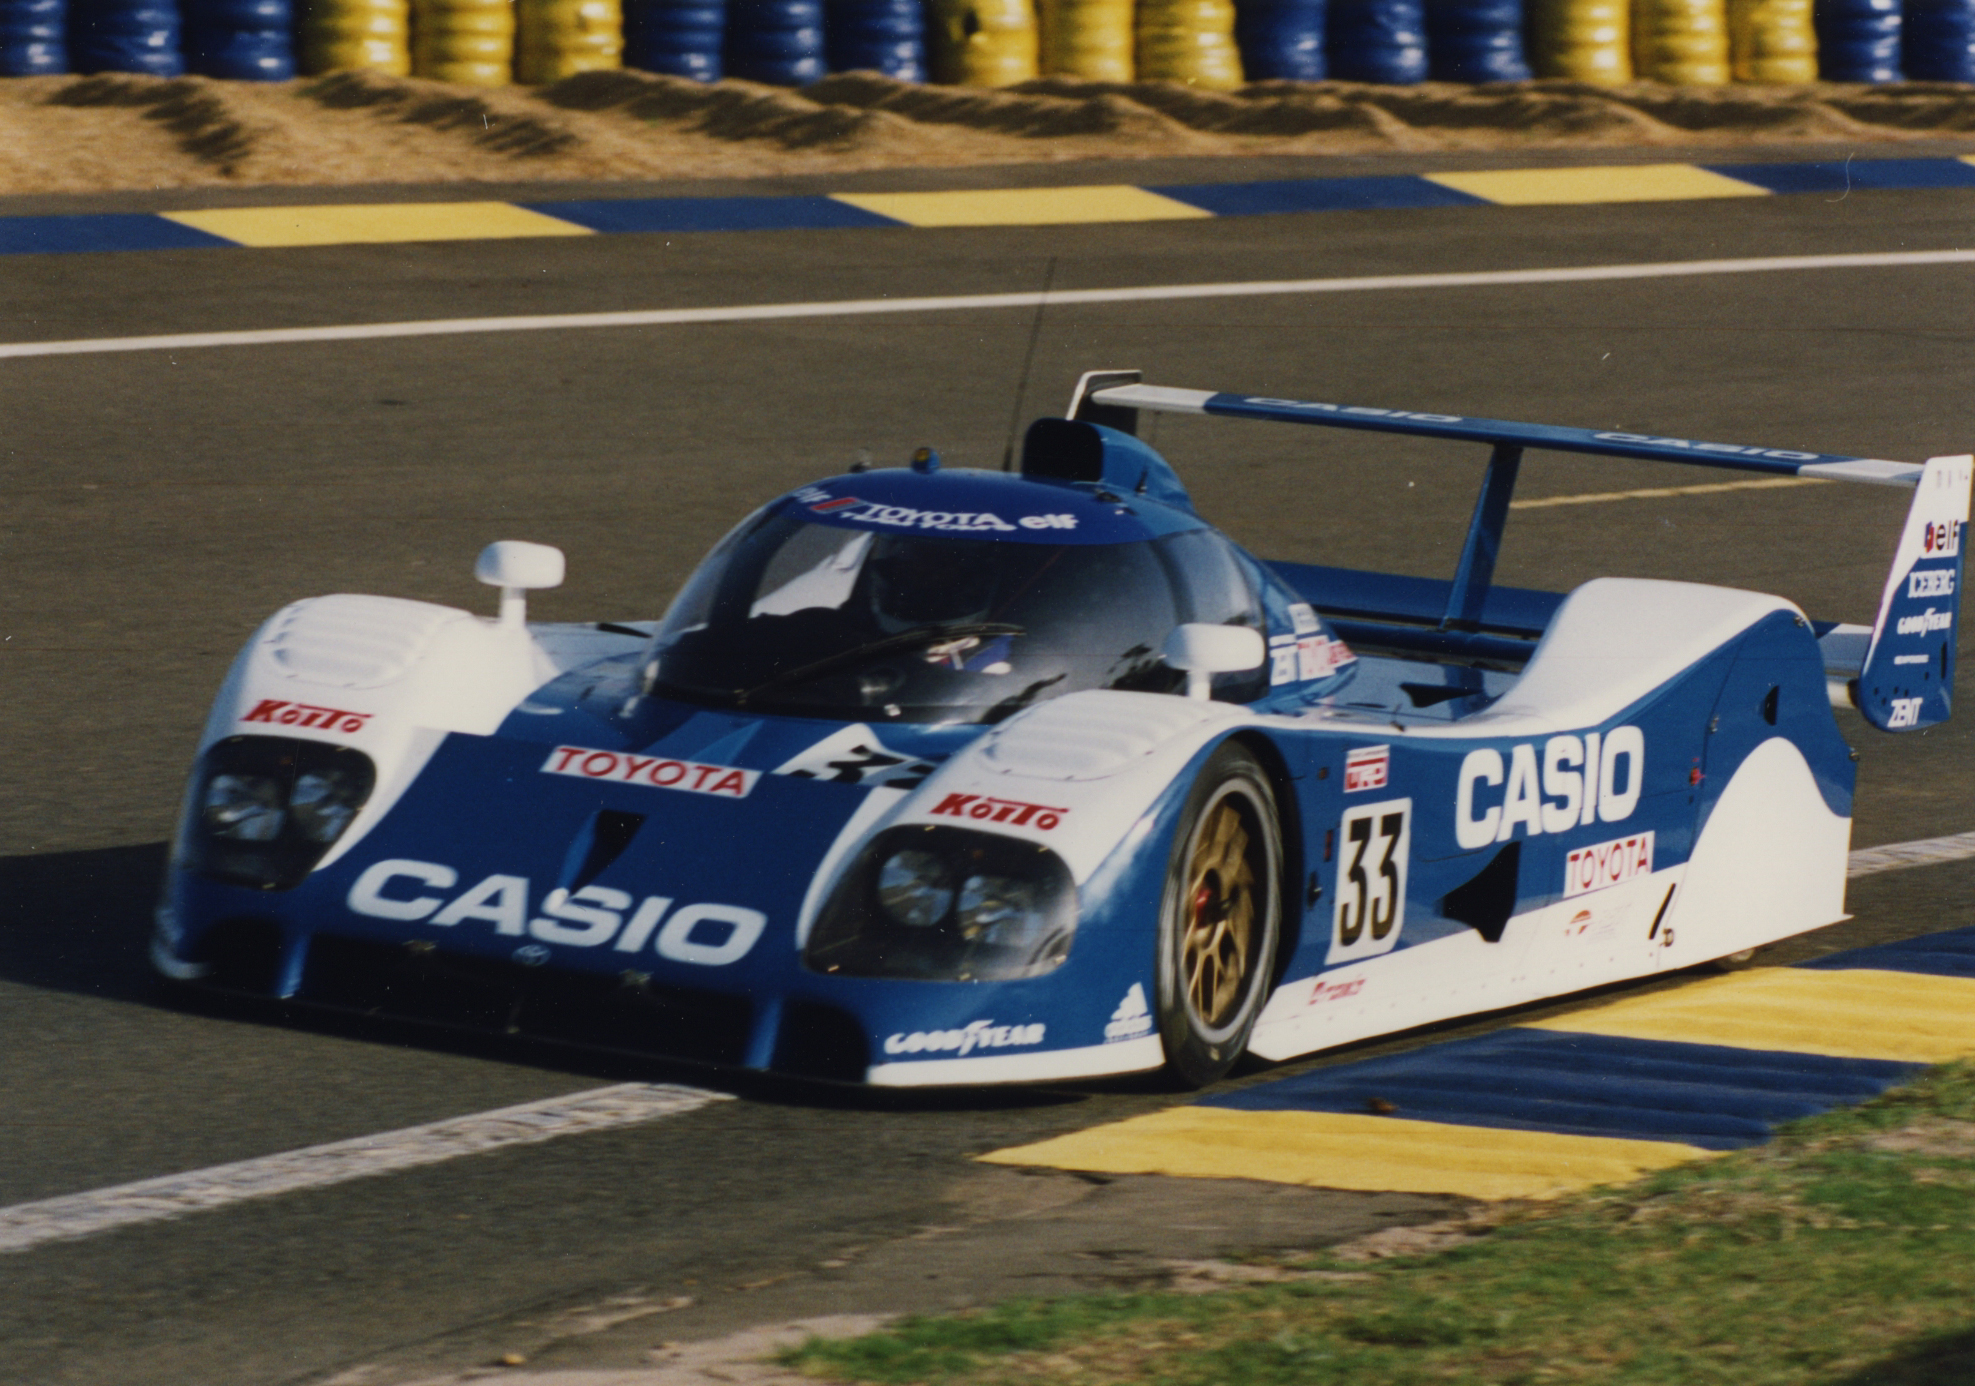 The Toyota TS010 had so much downforce that Andy Wallace broke his ribs trying to corner at full pelt during private testing prior to Le Mans.